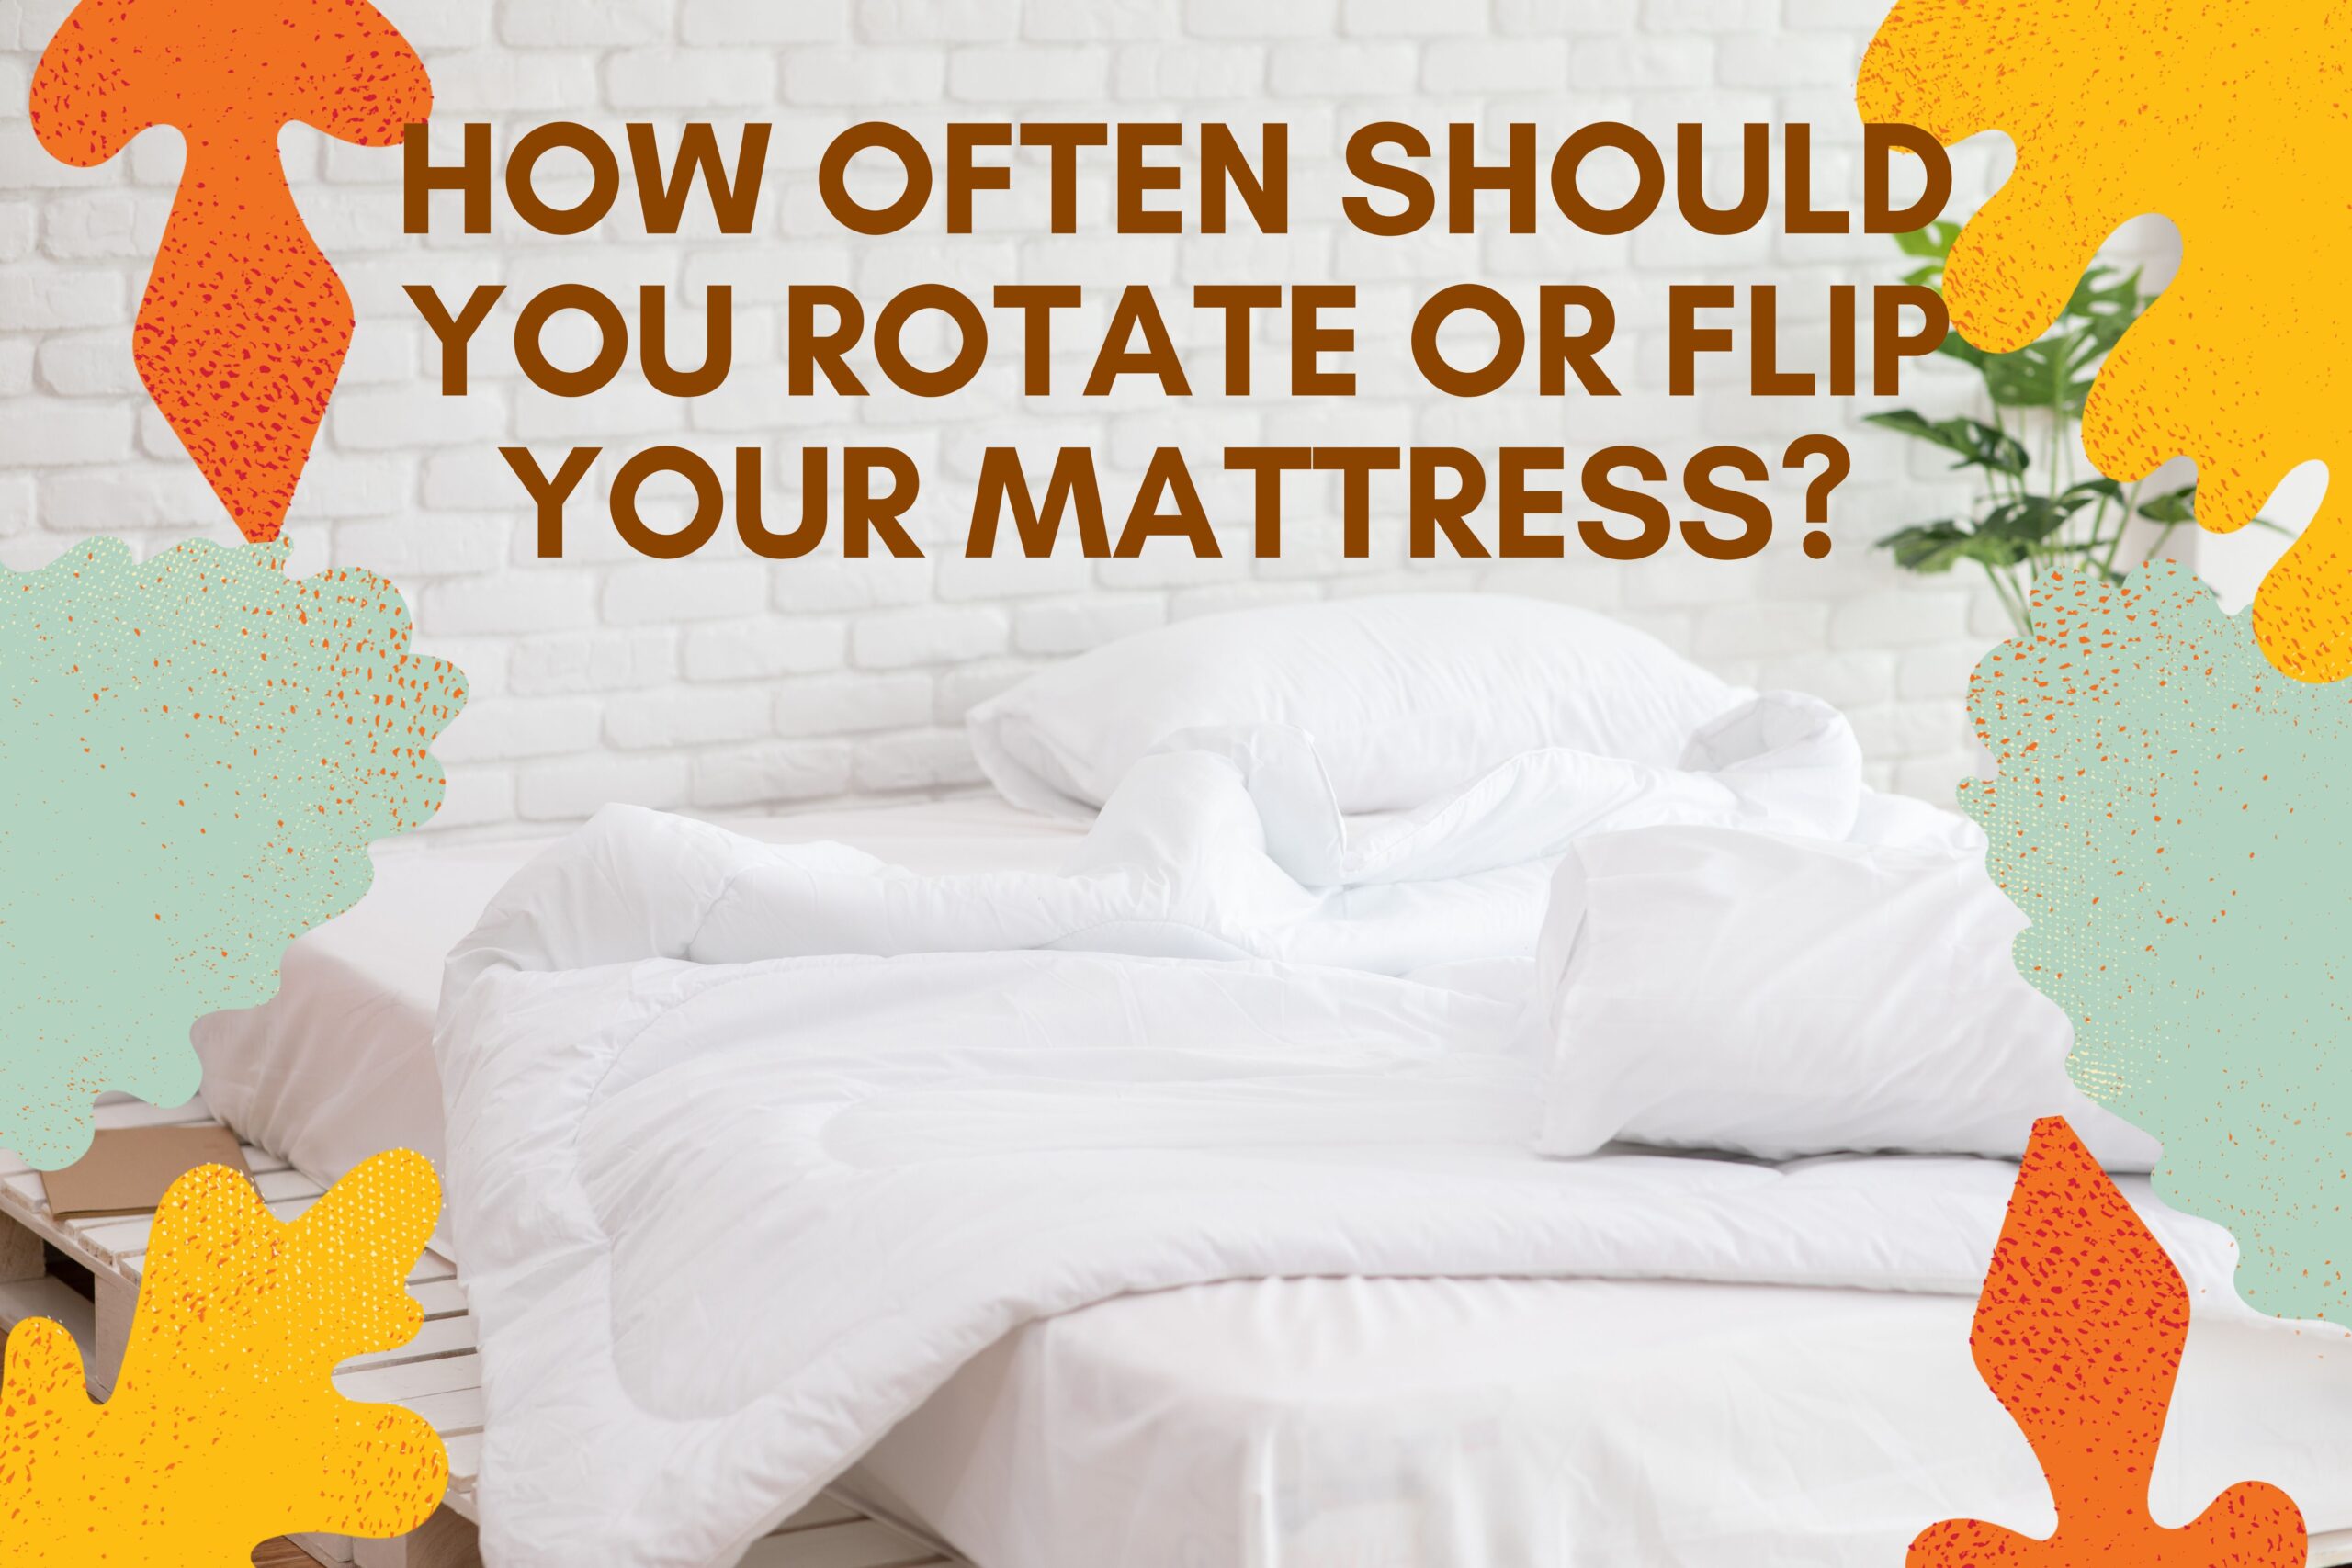 How Often Should You Rotate Or Flip Your Mattress?